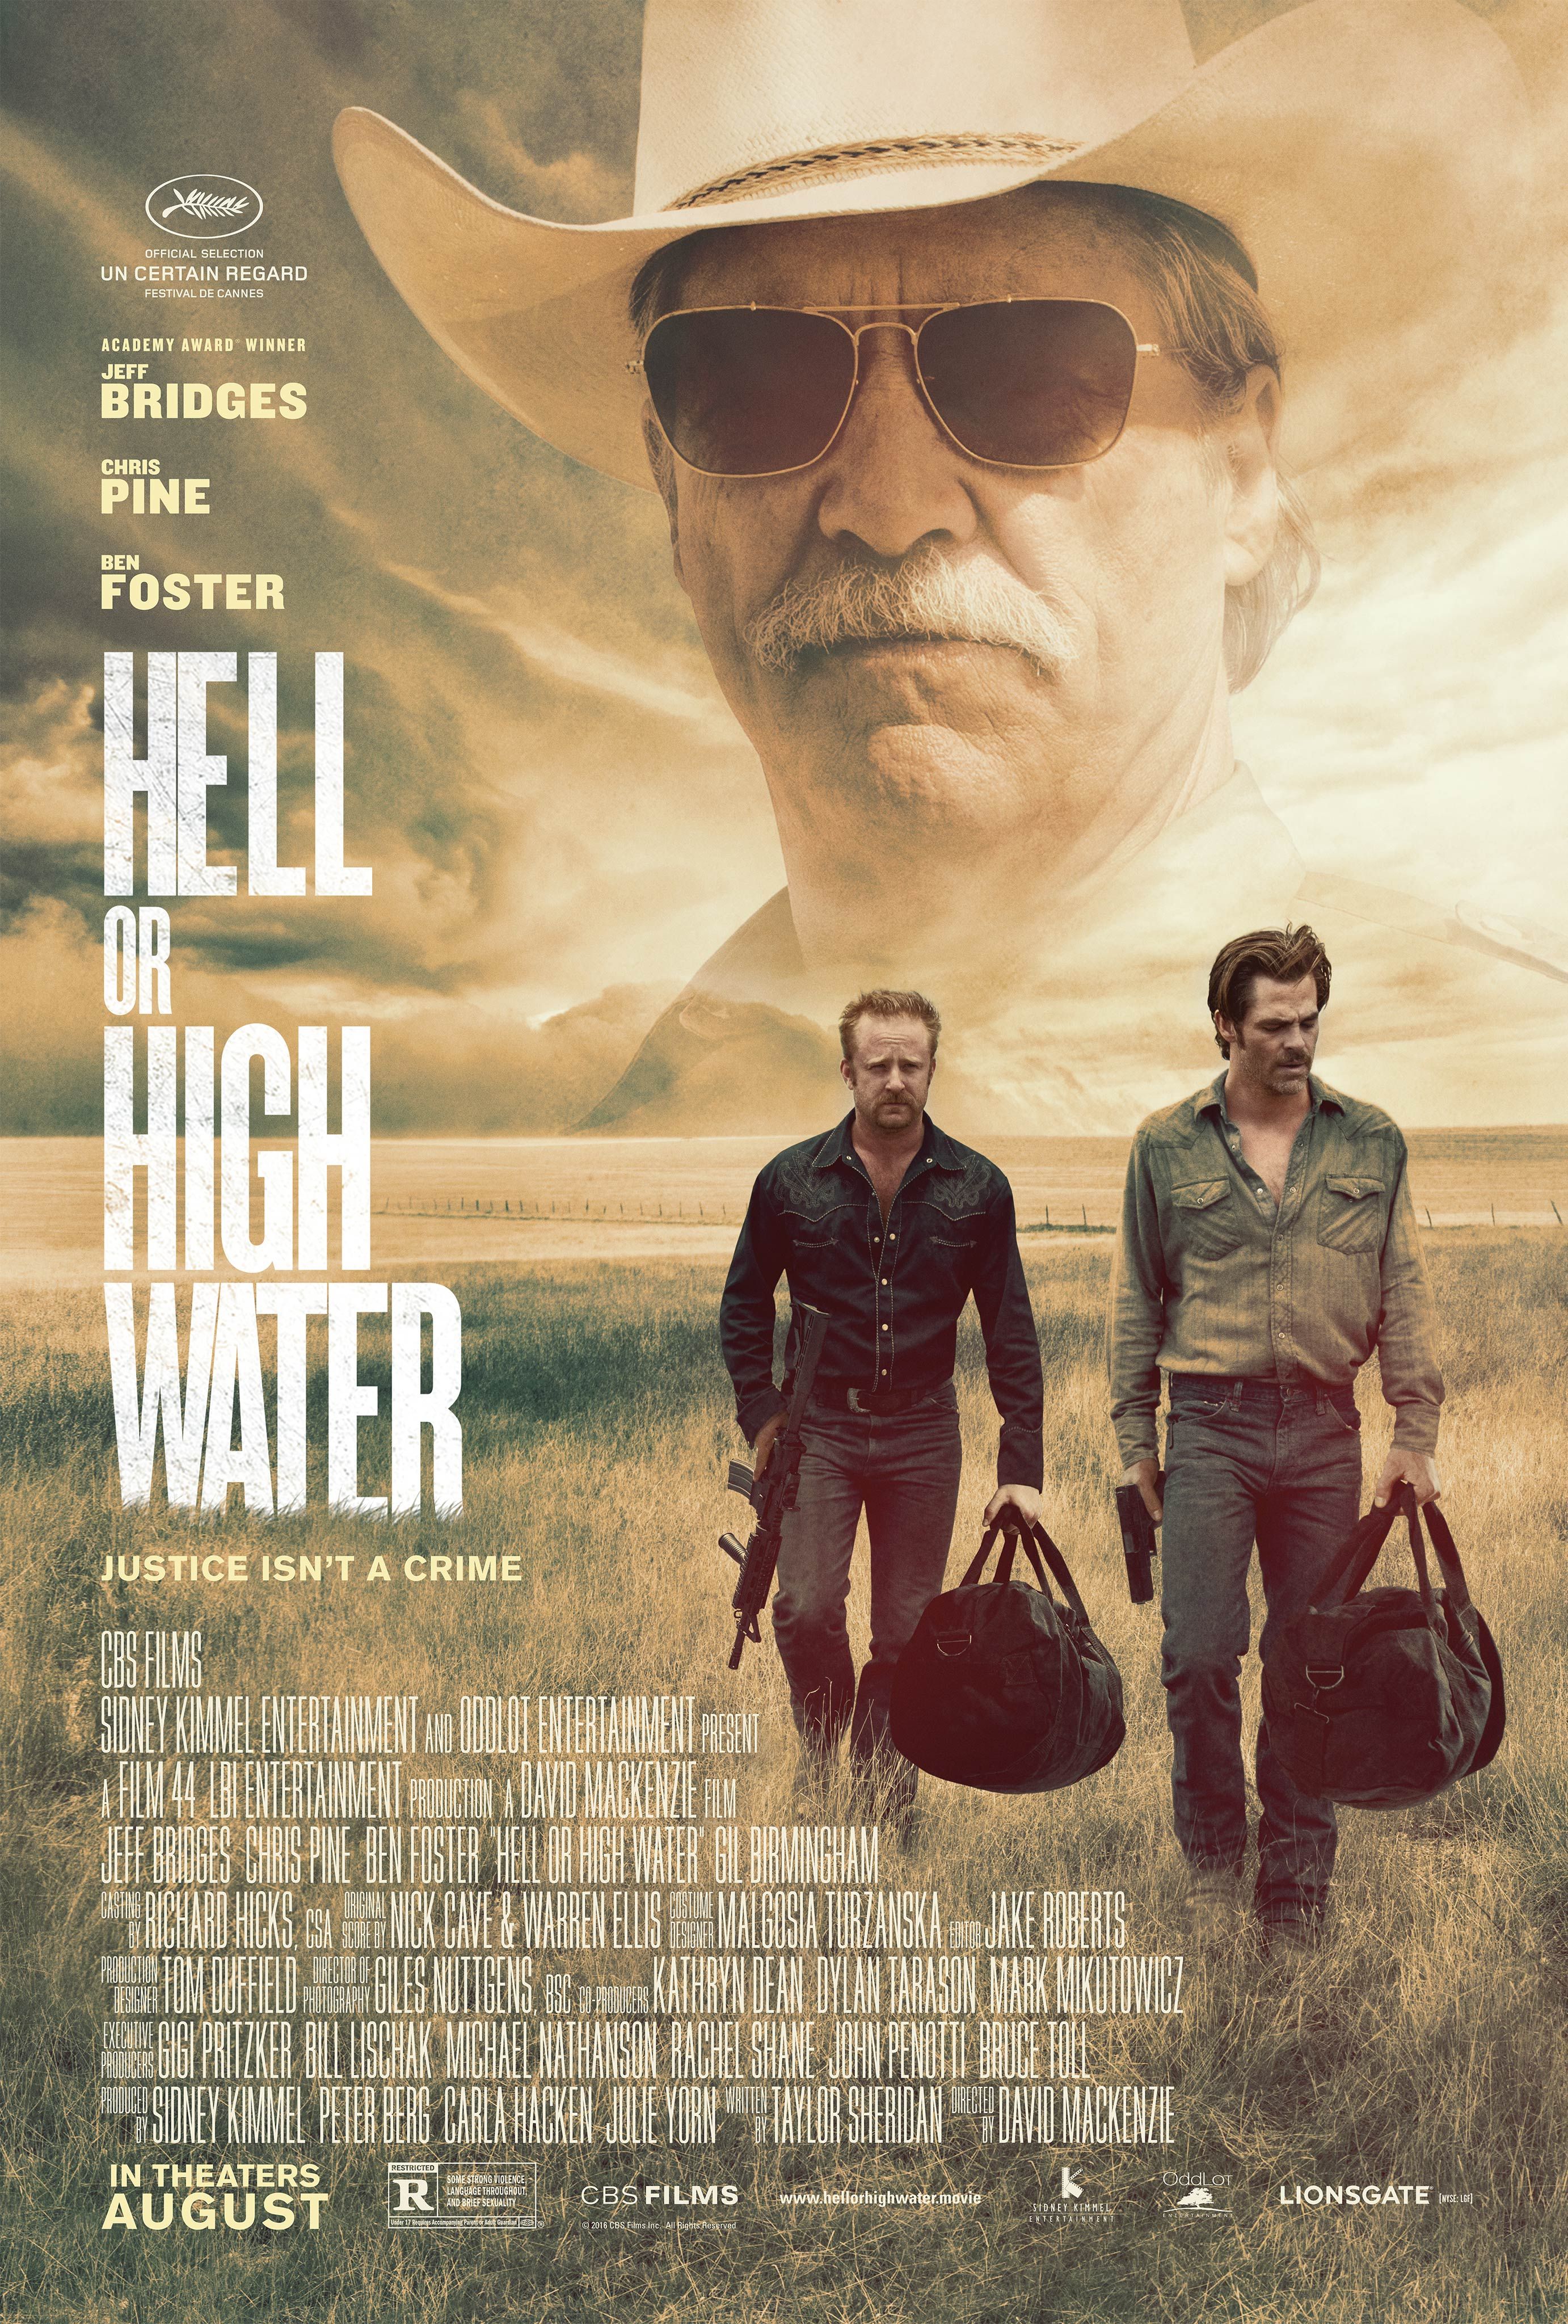 312-hell_or_high_water_movie_poster.jpg